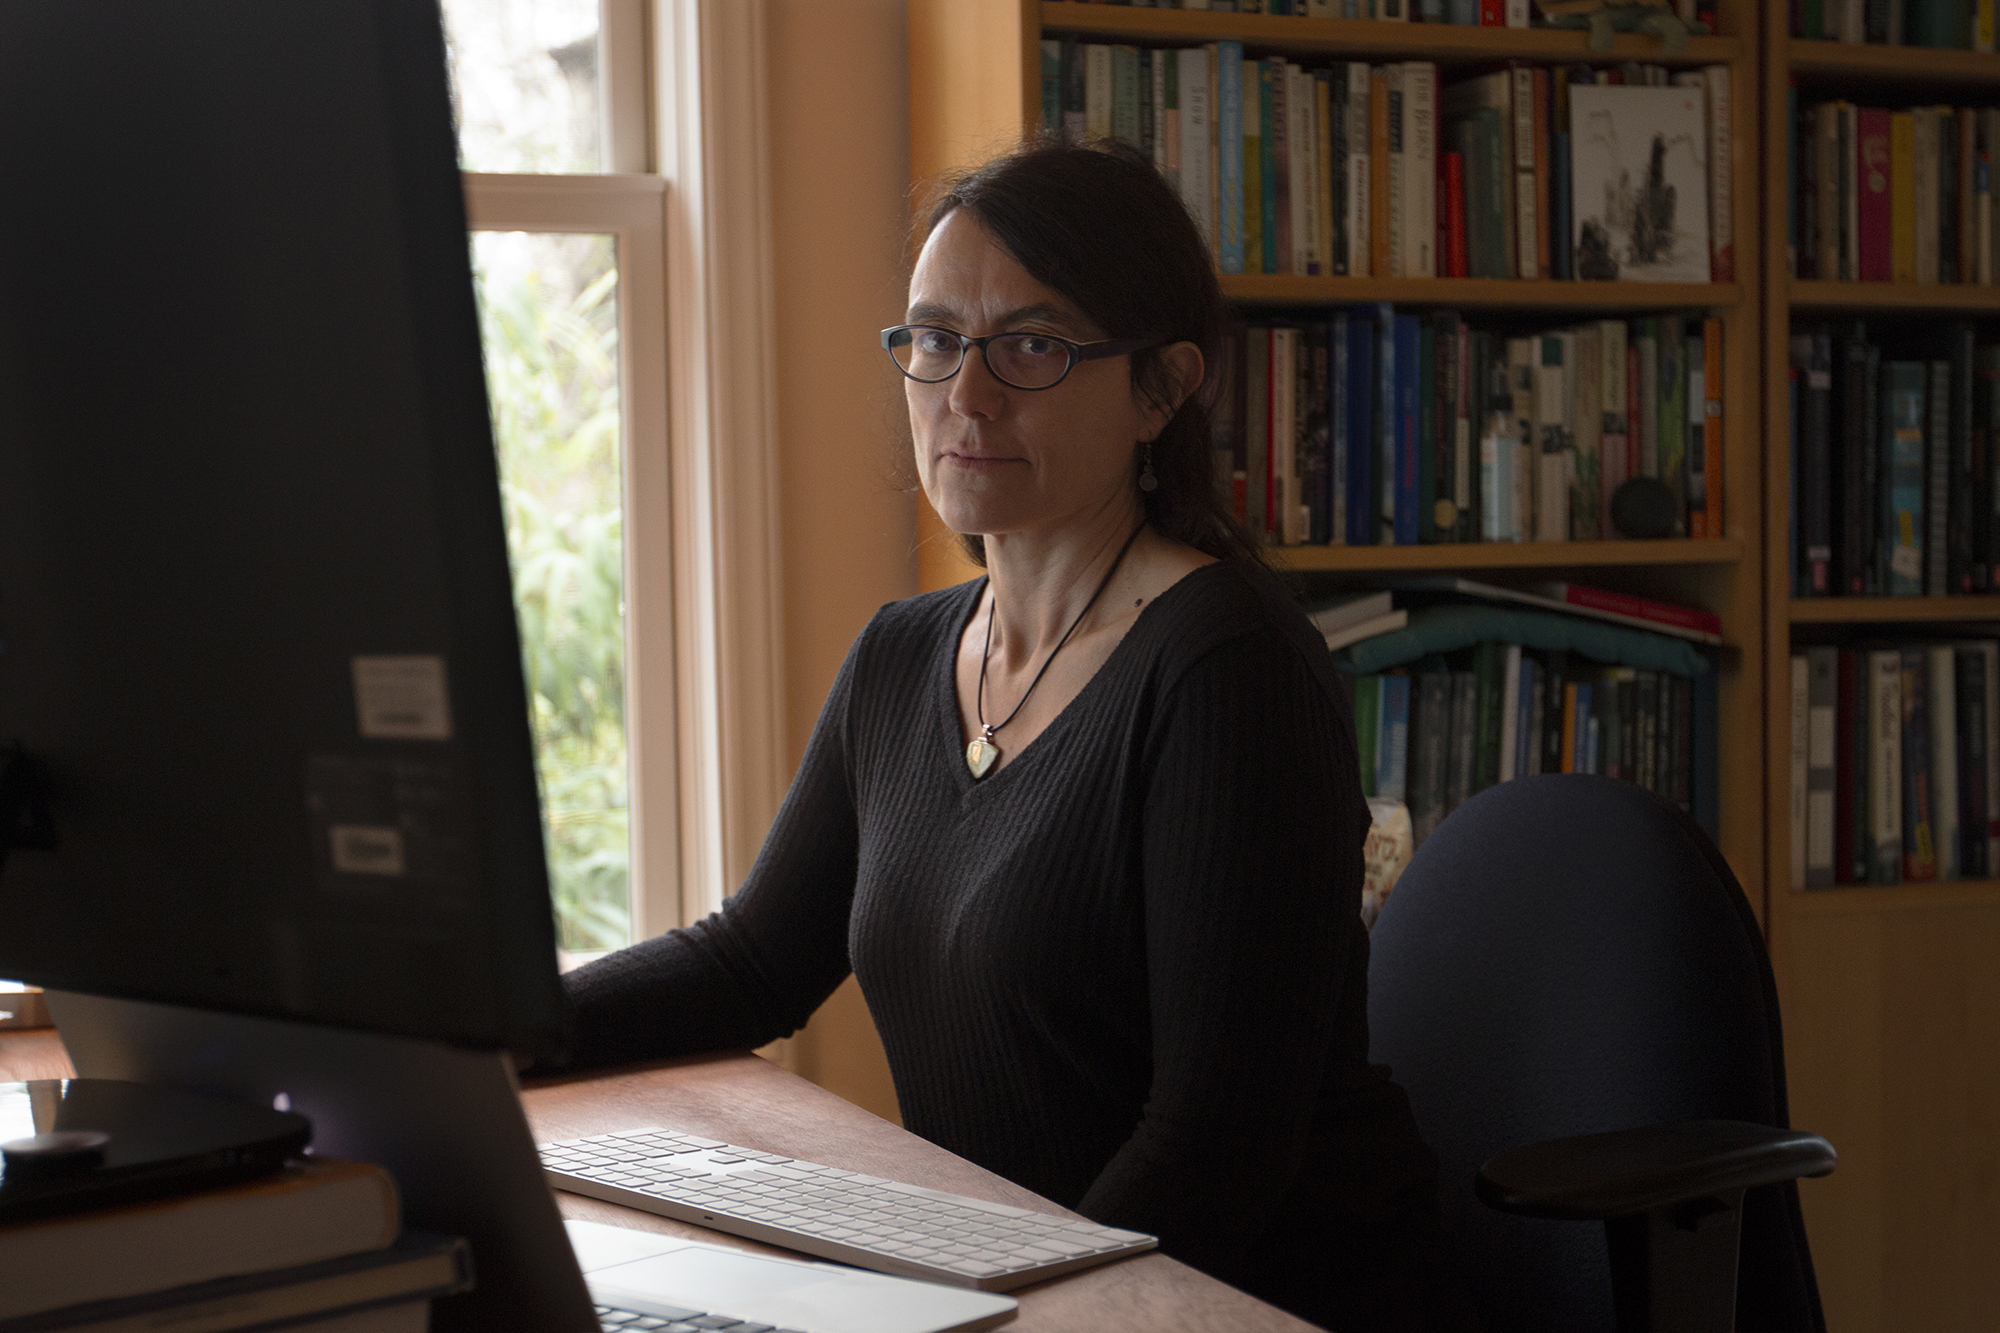 Julia Haslett, a documentary filmmaker and assistant professor of communication, edits her films in her home office in Carrboro, North Carolina. (photo by Alyssa LaFaro)